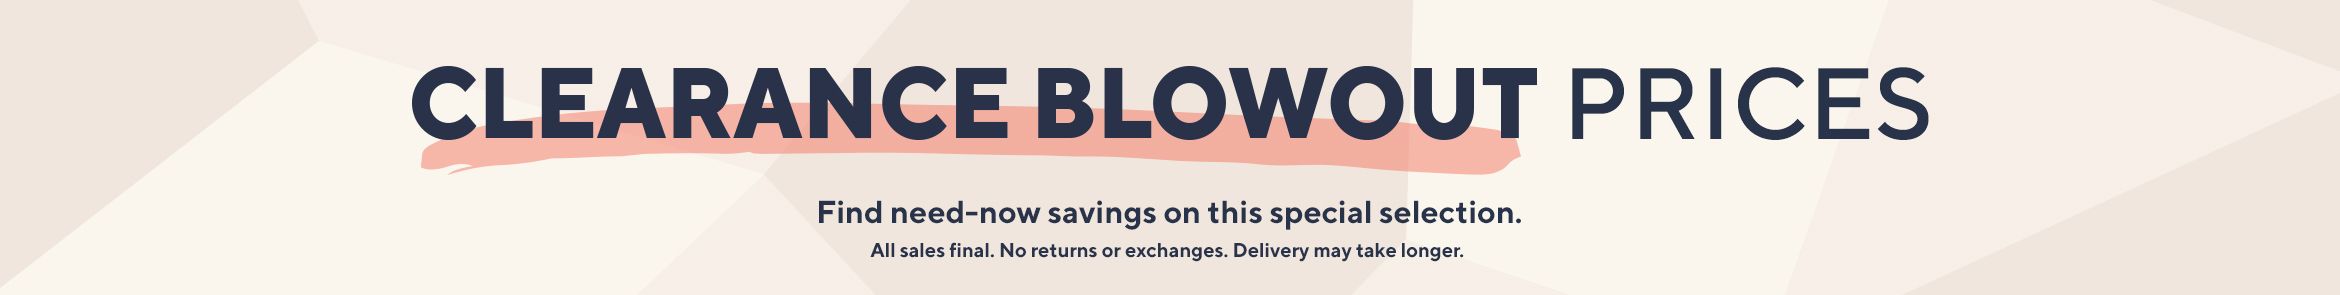 Clearance Blowout Prices: Find need-now savings on this special selection. All sales final. No returns or exchanges. Delivery may take longer. 